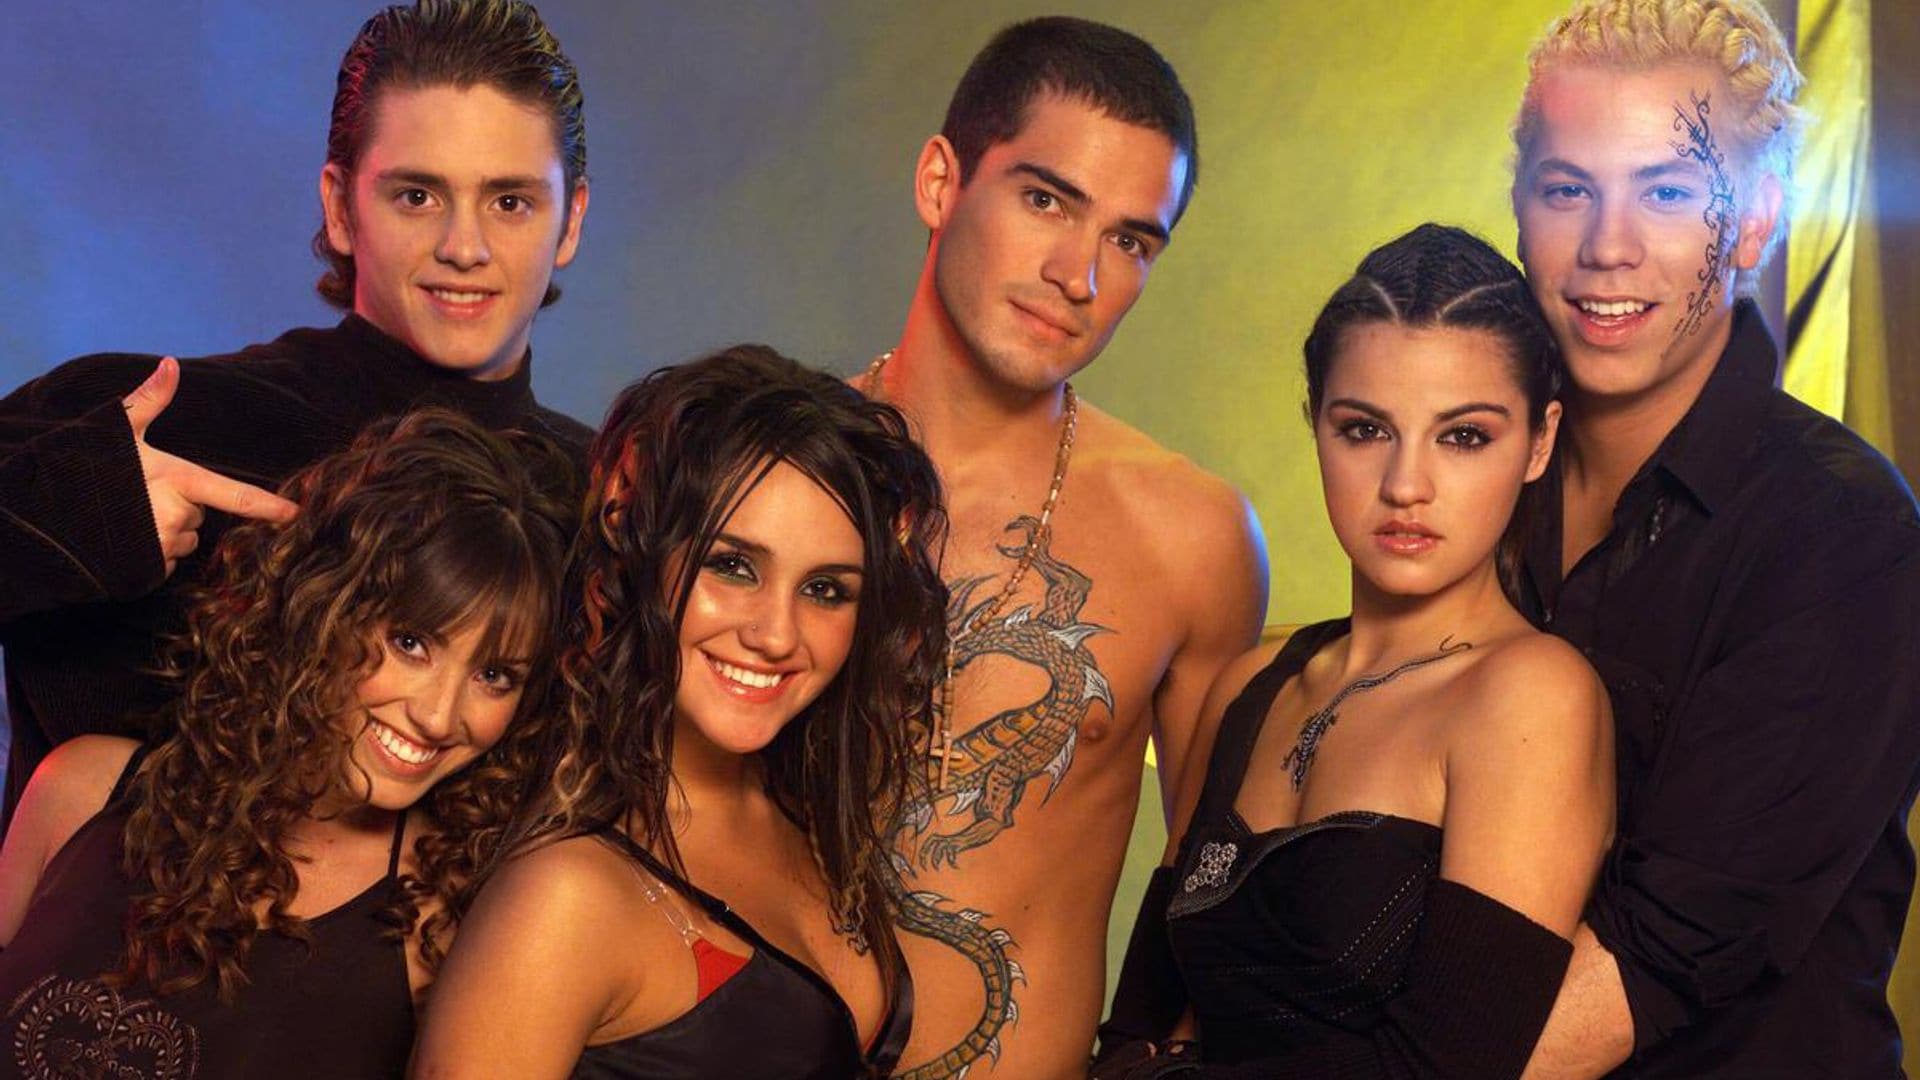 RBD is going on tour! Here are the best memes & fan reactions